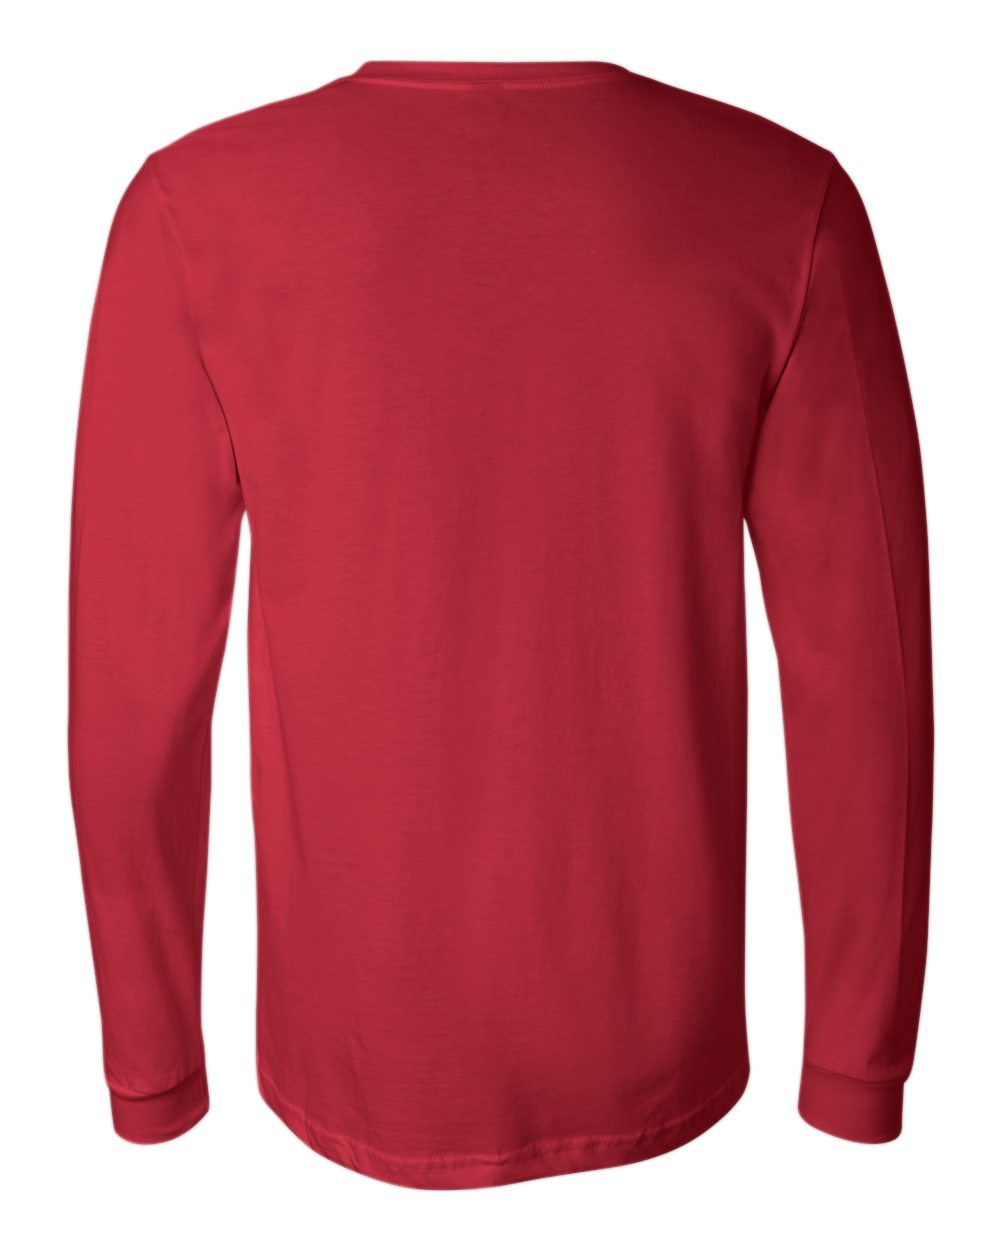 BELLA + CANVAS Unisex Jersey Long Sleeve Tee 3501 #color_Red